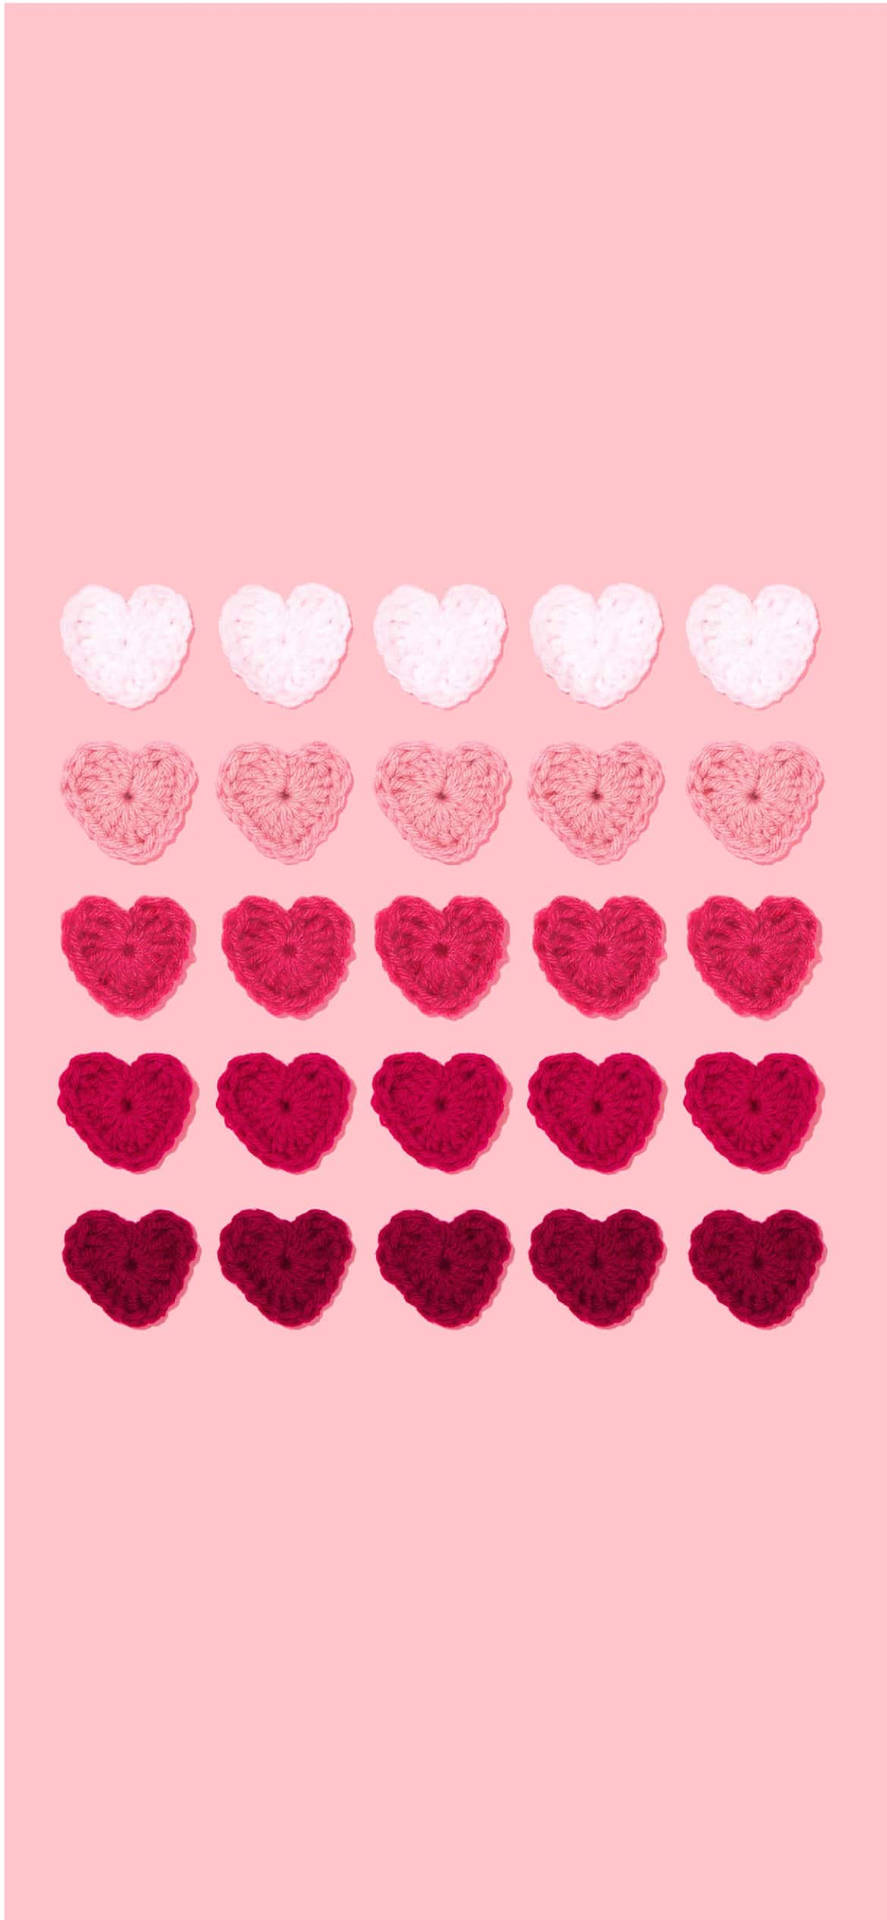 Aesthetic Pink Iphone Embroidered Hearts